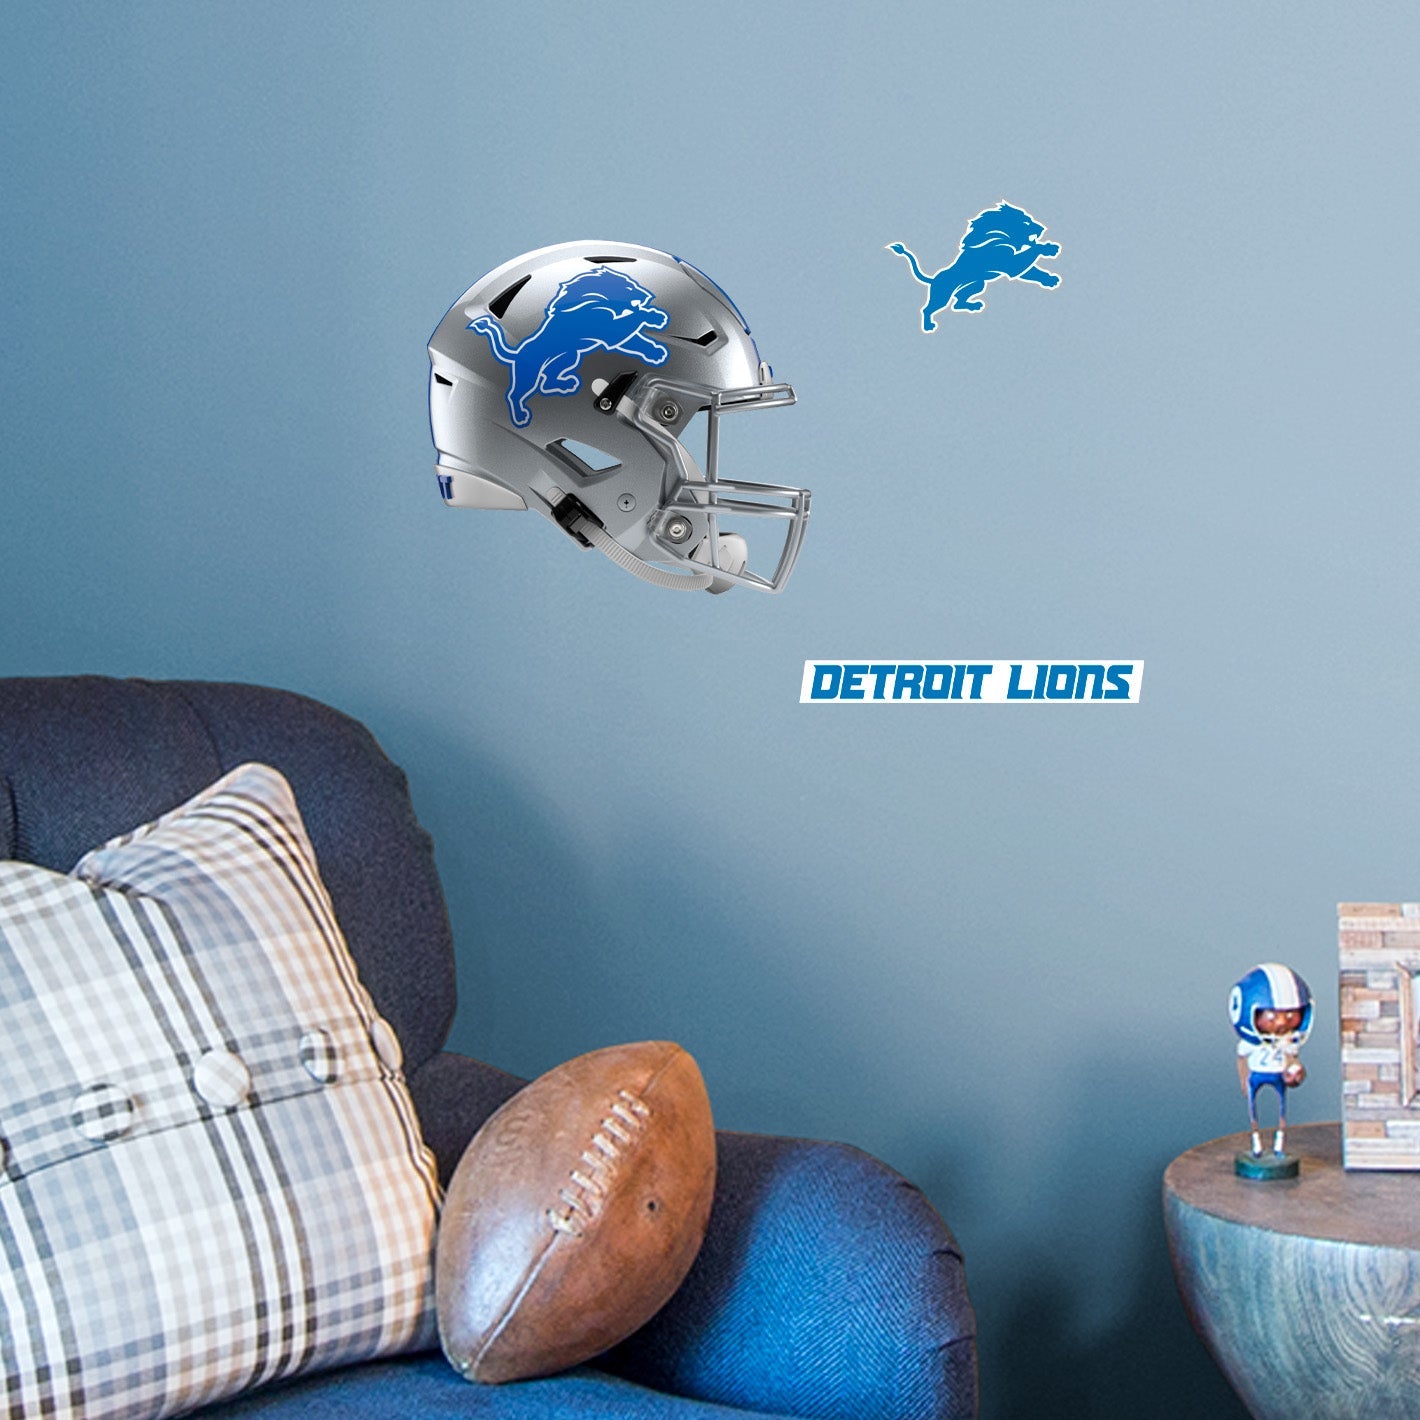 Detroit Lions: Helmet - Officially Licensed NFL Removable Adhesive Decal